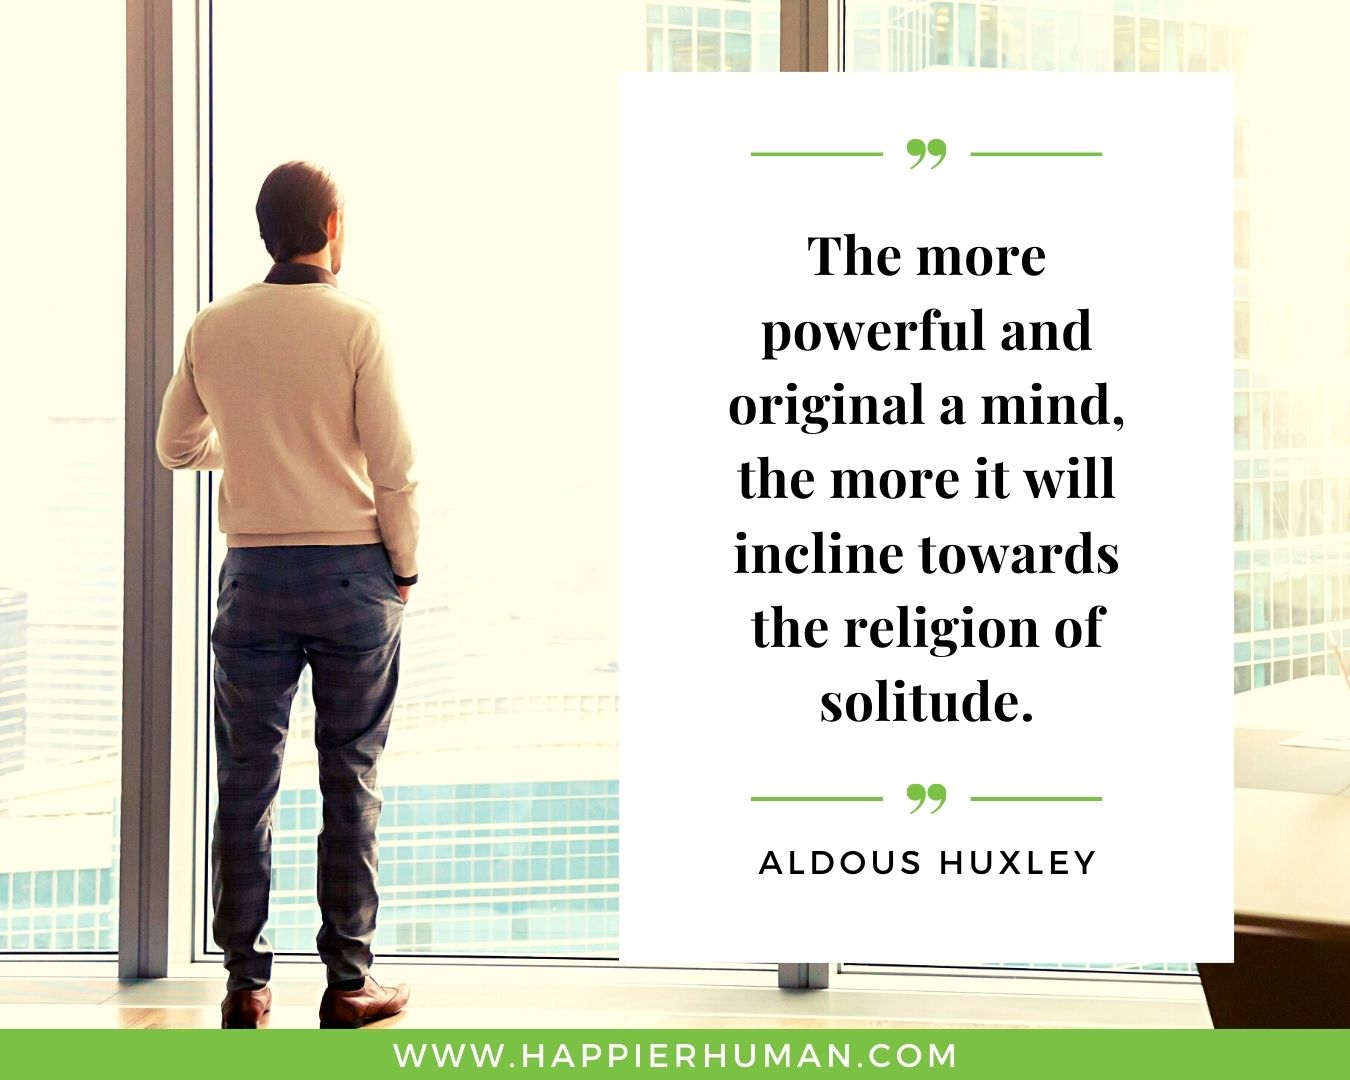 Introvert Quotes - “The more powerful and original a mind, the more it will incline towards the religion of solitude.” – Aldous Huxley